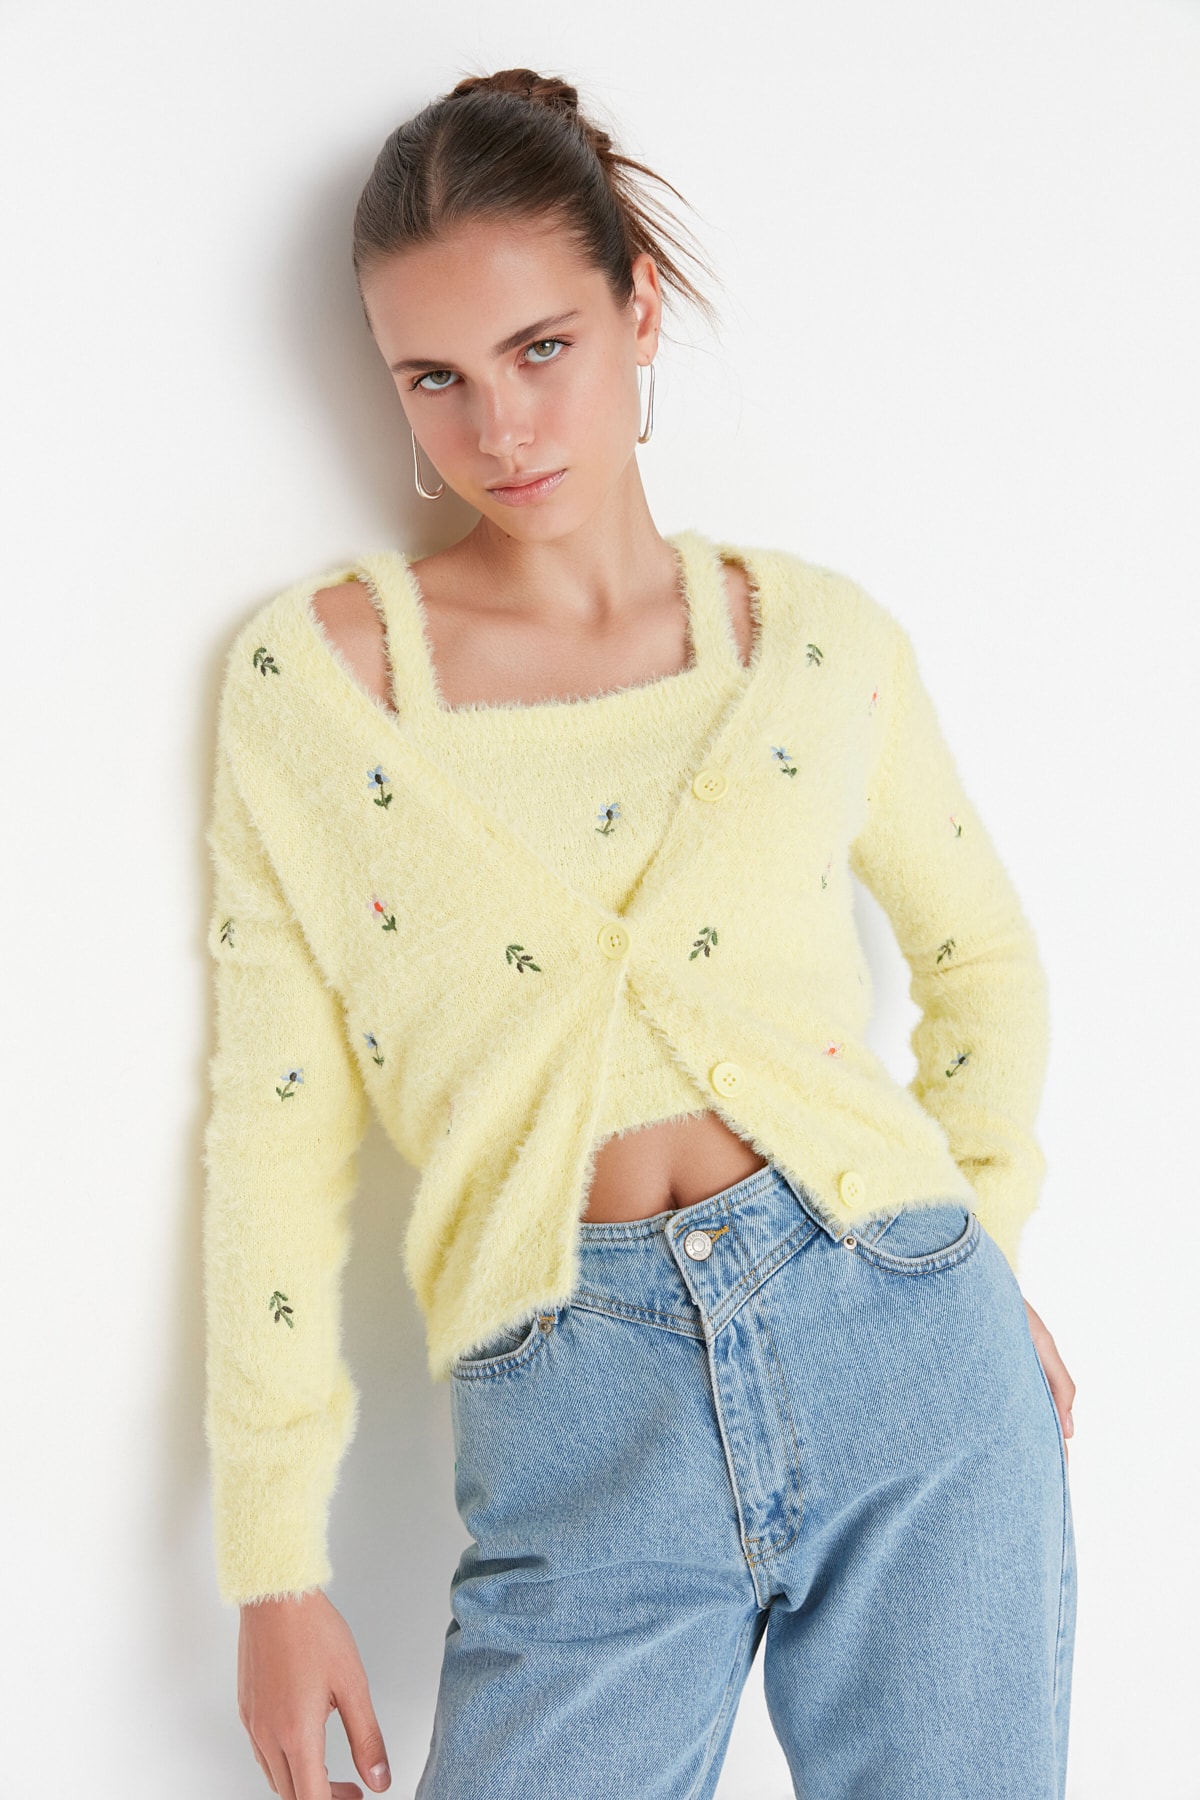 Trendyol Yellow Feathered/Beard Rope Blouse, Cardigan-Knitwear Suit